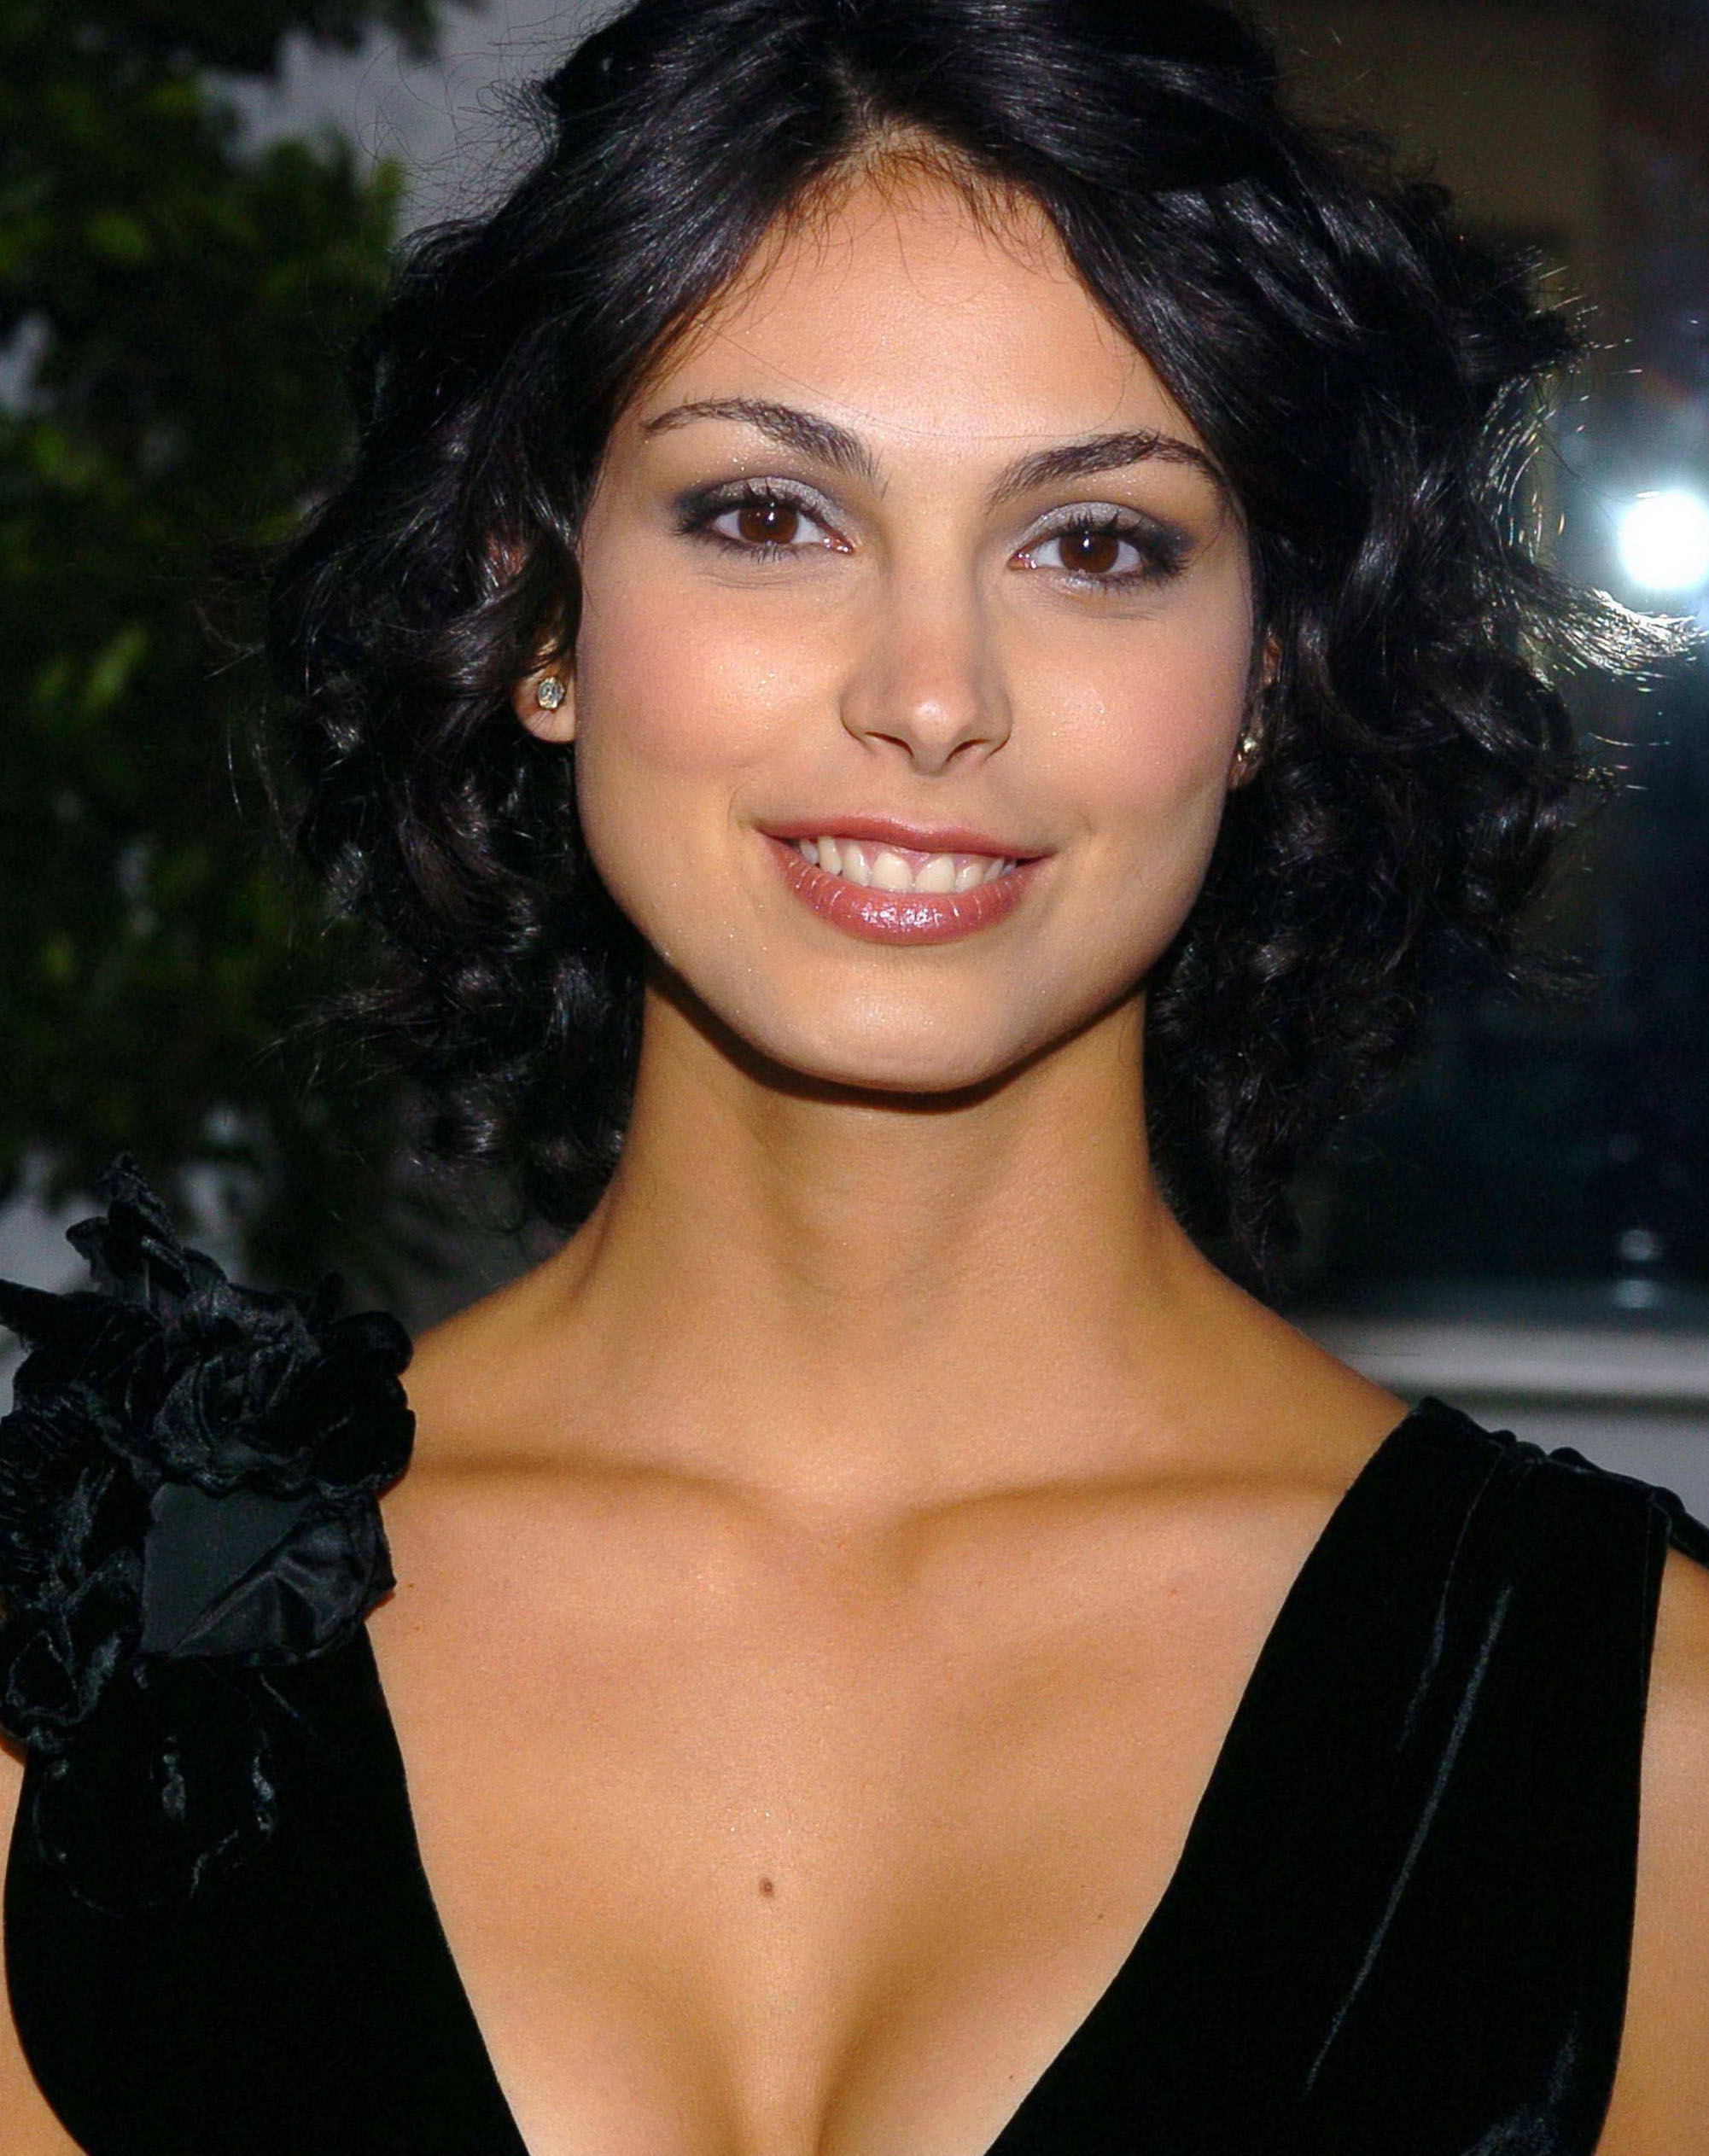 [BOOM] TV Actress Morena Baccarin Nude - Fappening Sauce